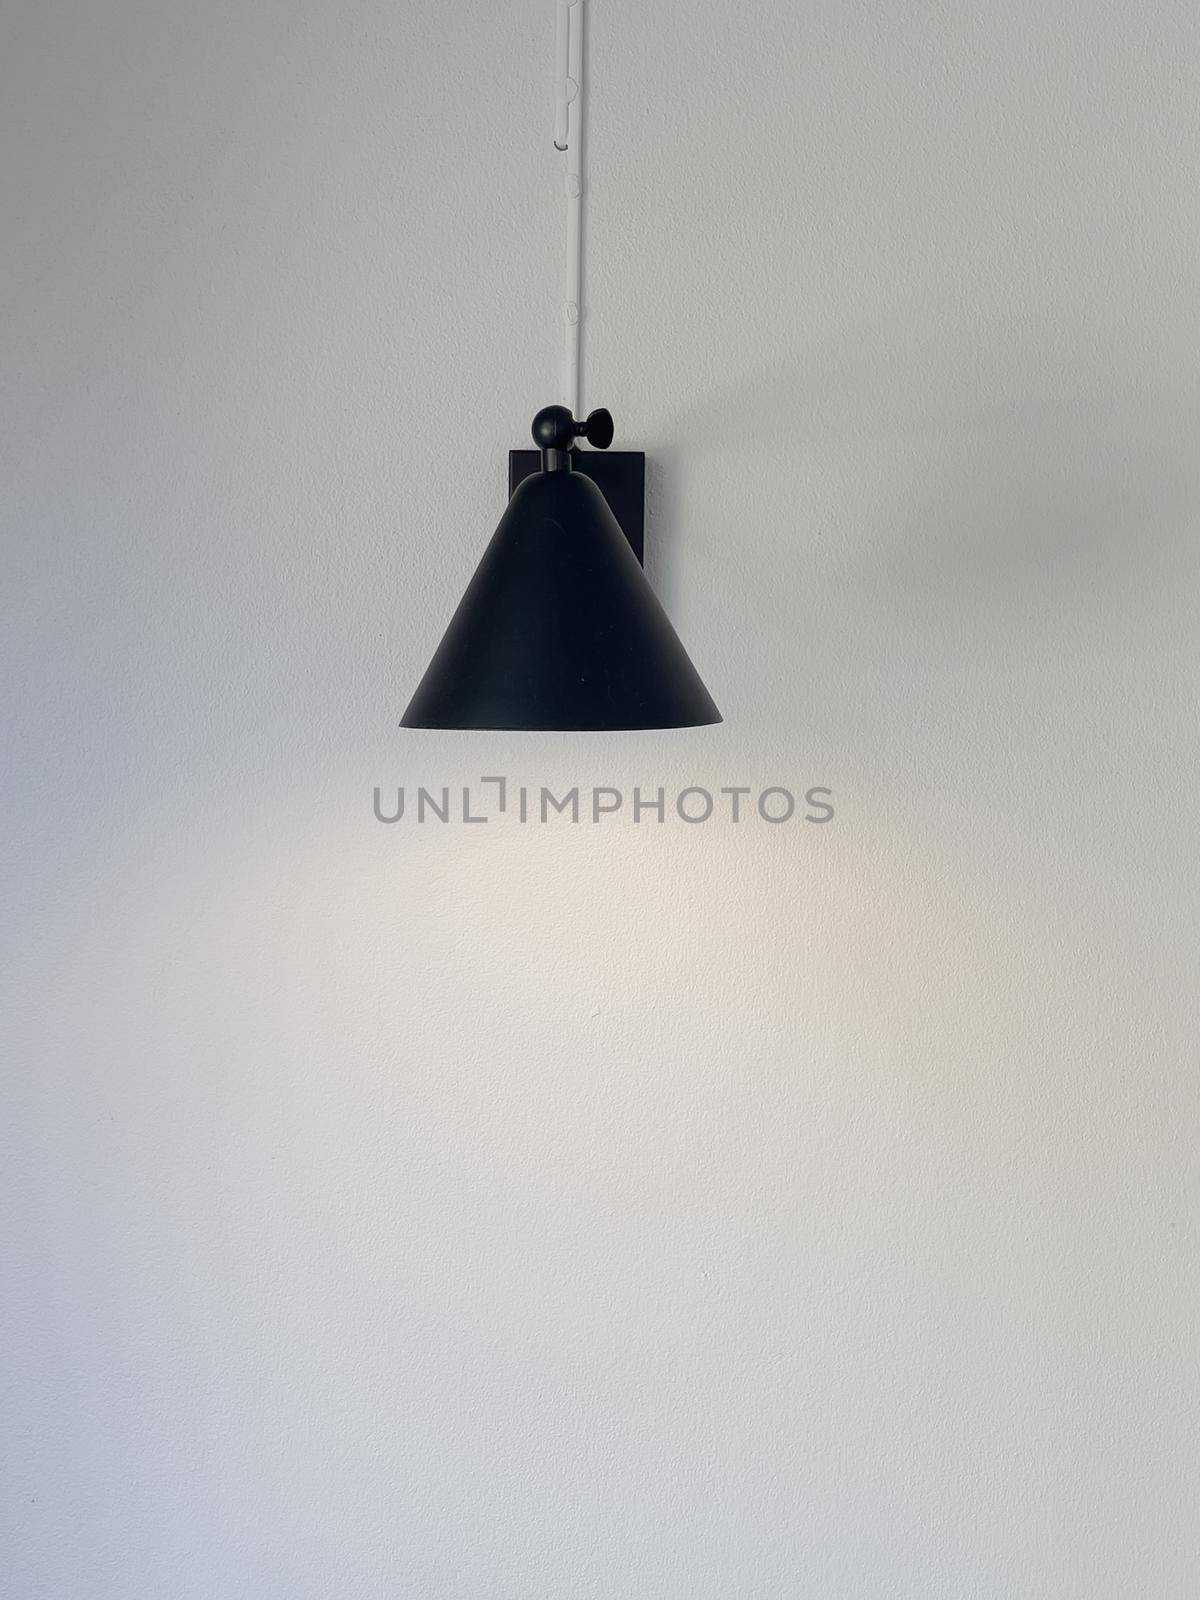 Black lamp hanging from the ceiling, stock photo